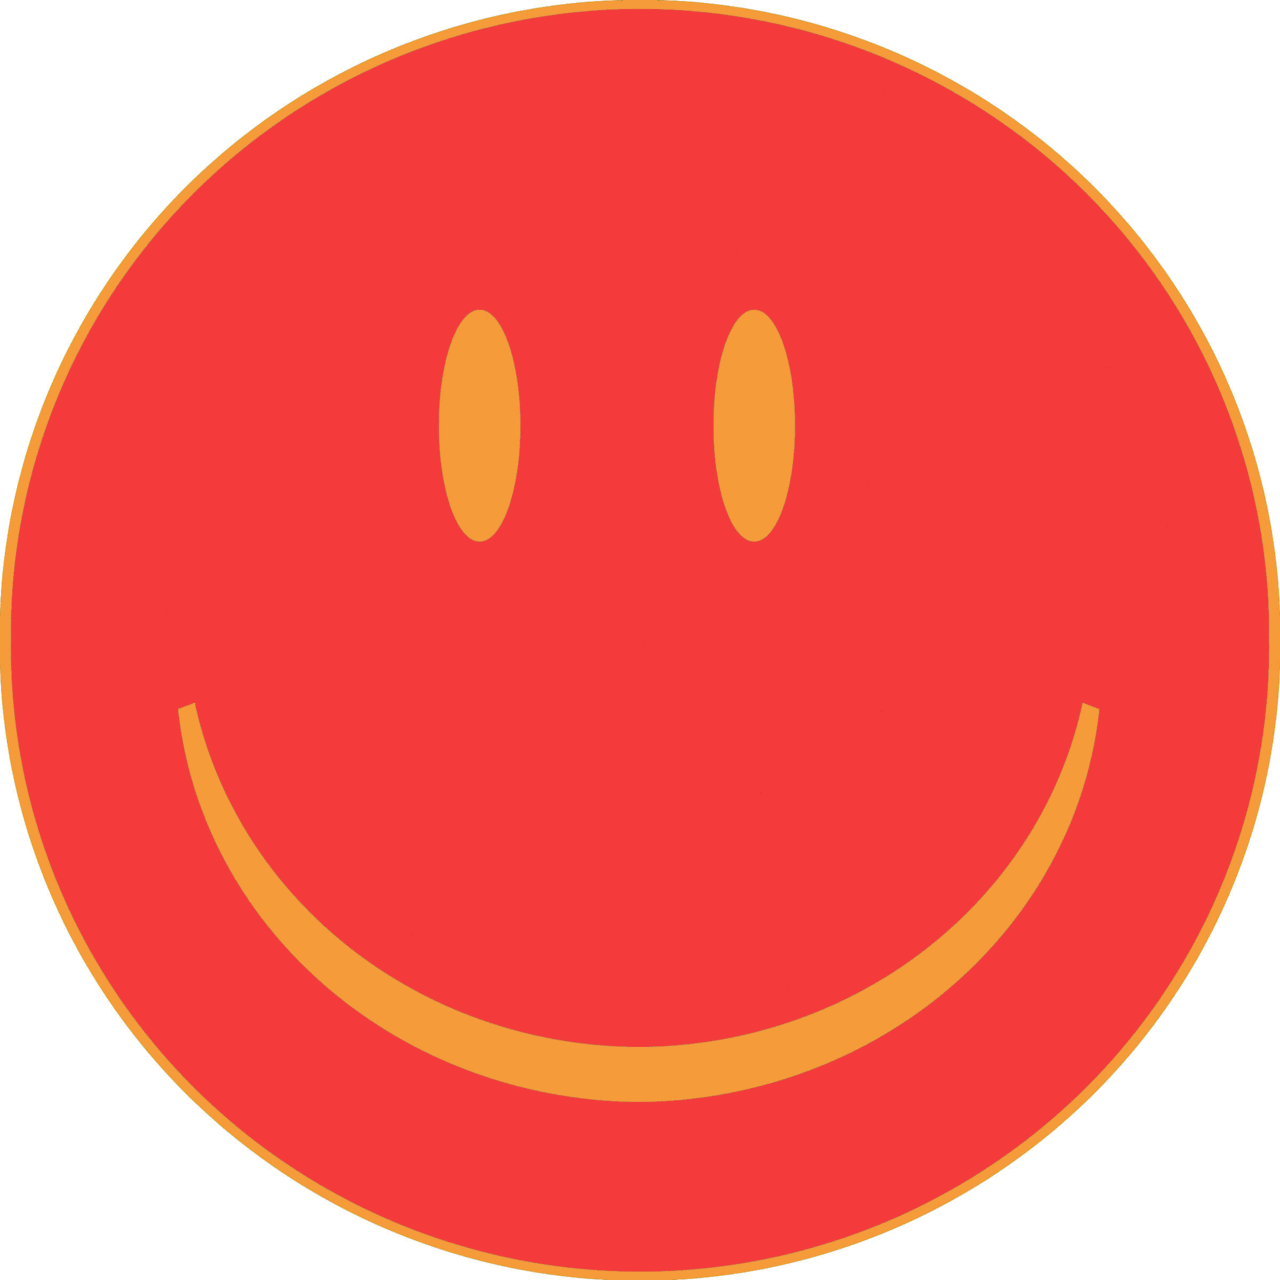 Smiley Face Rainbow Grizy Gif Find On Gifer Riset